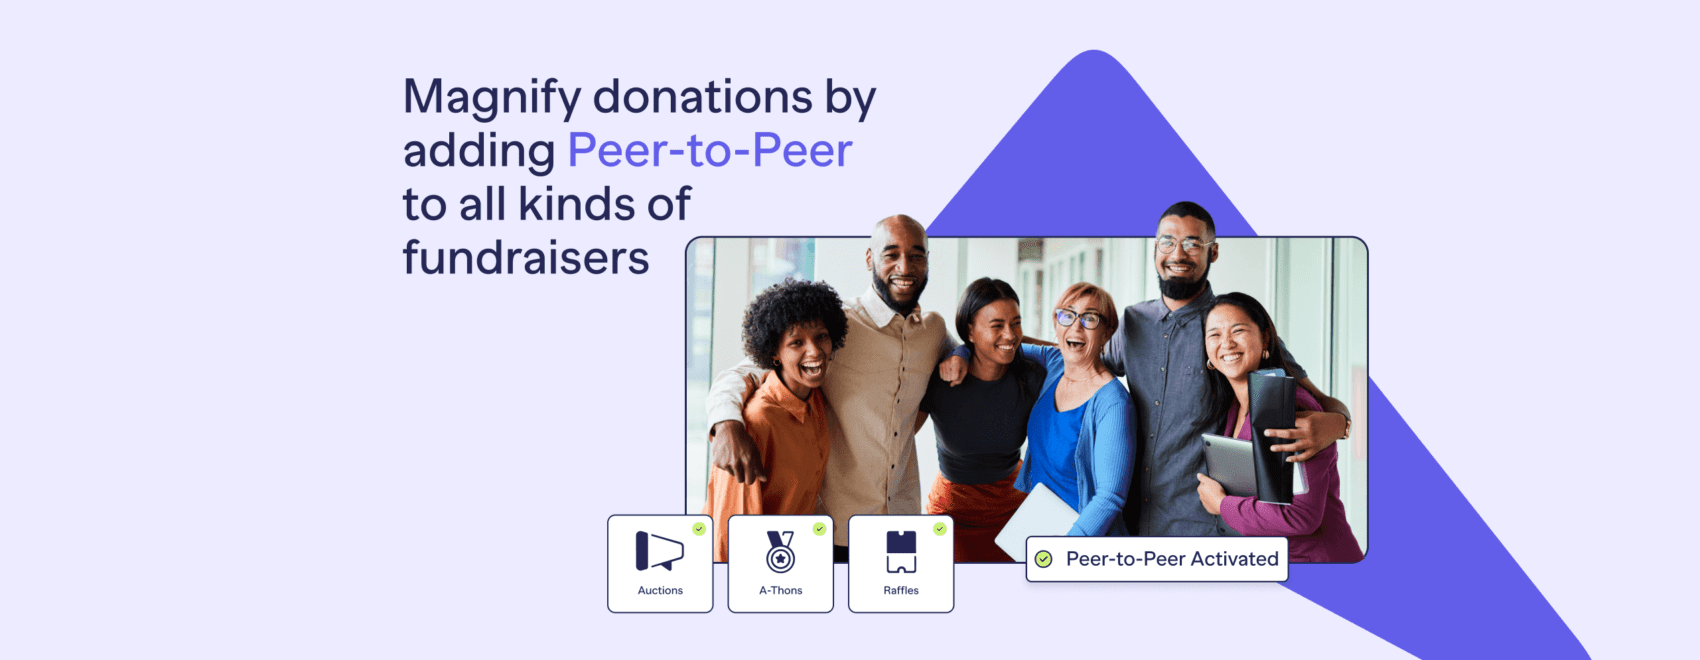 Magnify donations by adding Peer to Peer to all kinds of fundraisers